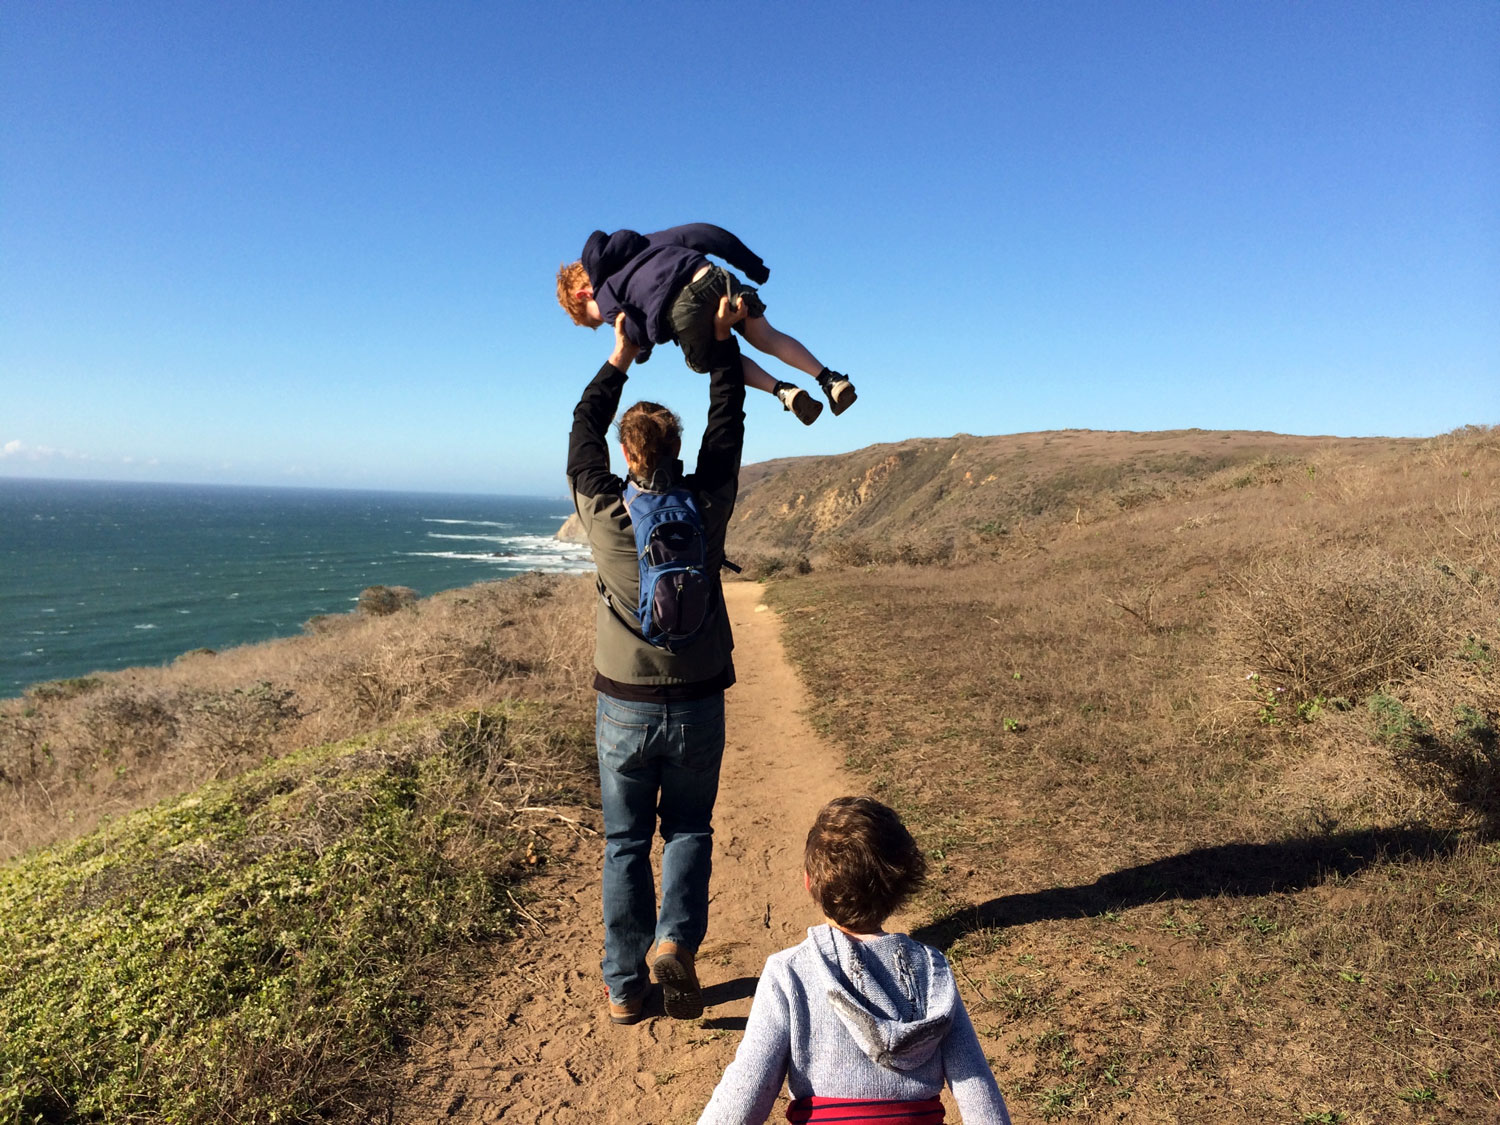 Tomales Point Trail